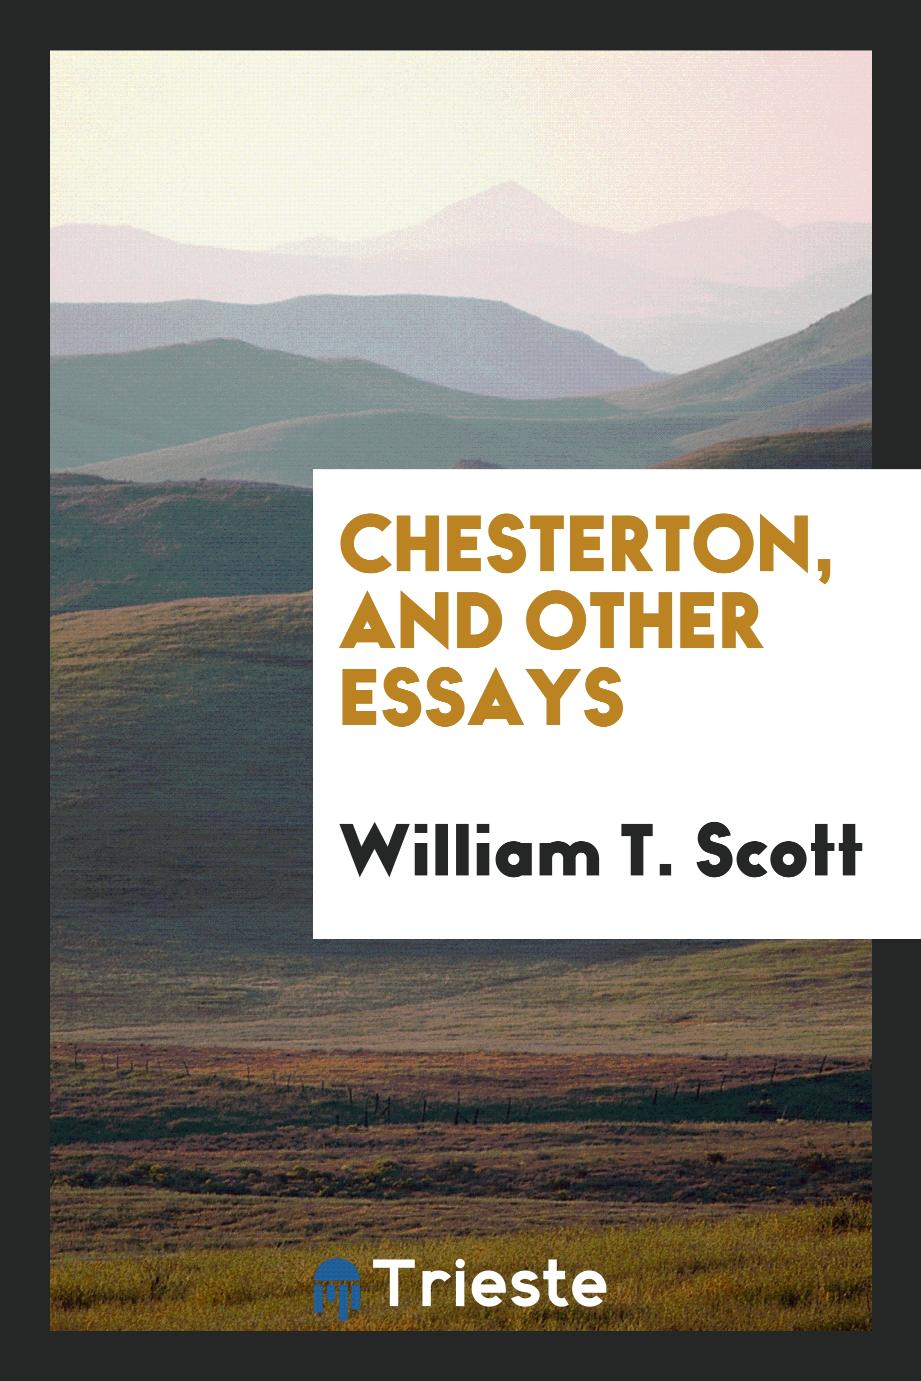 Chesterton, and other essays